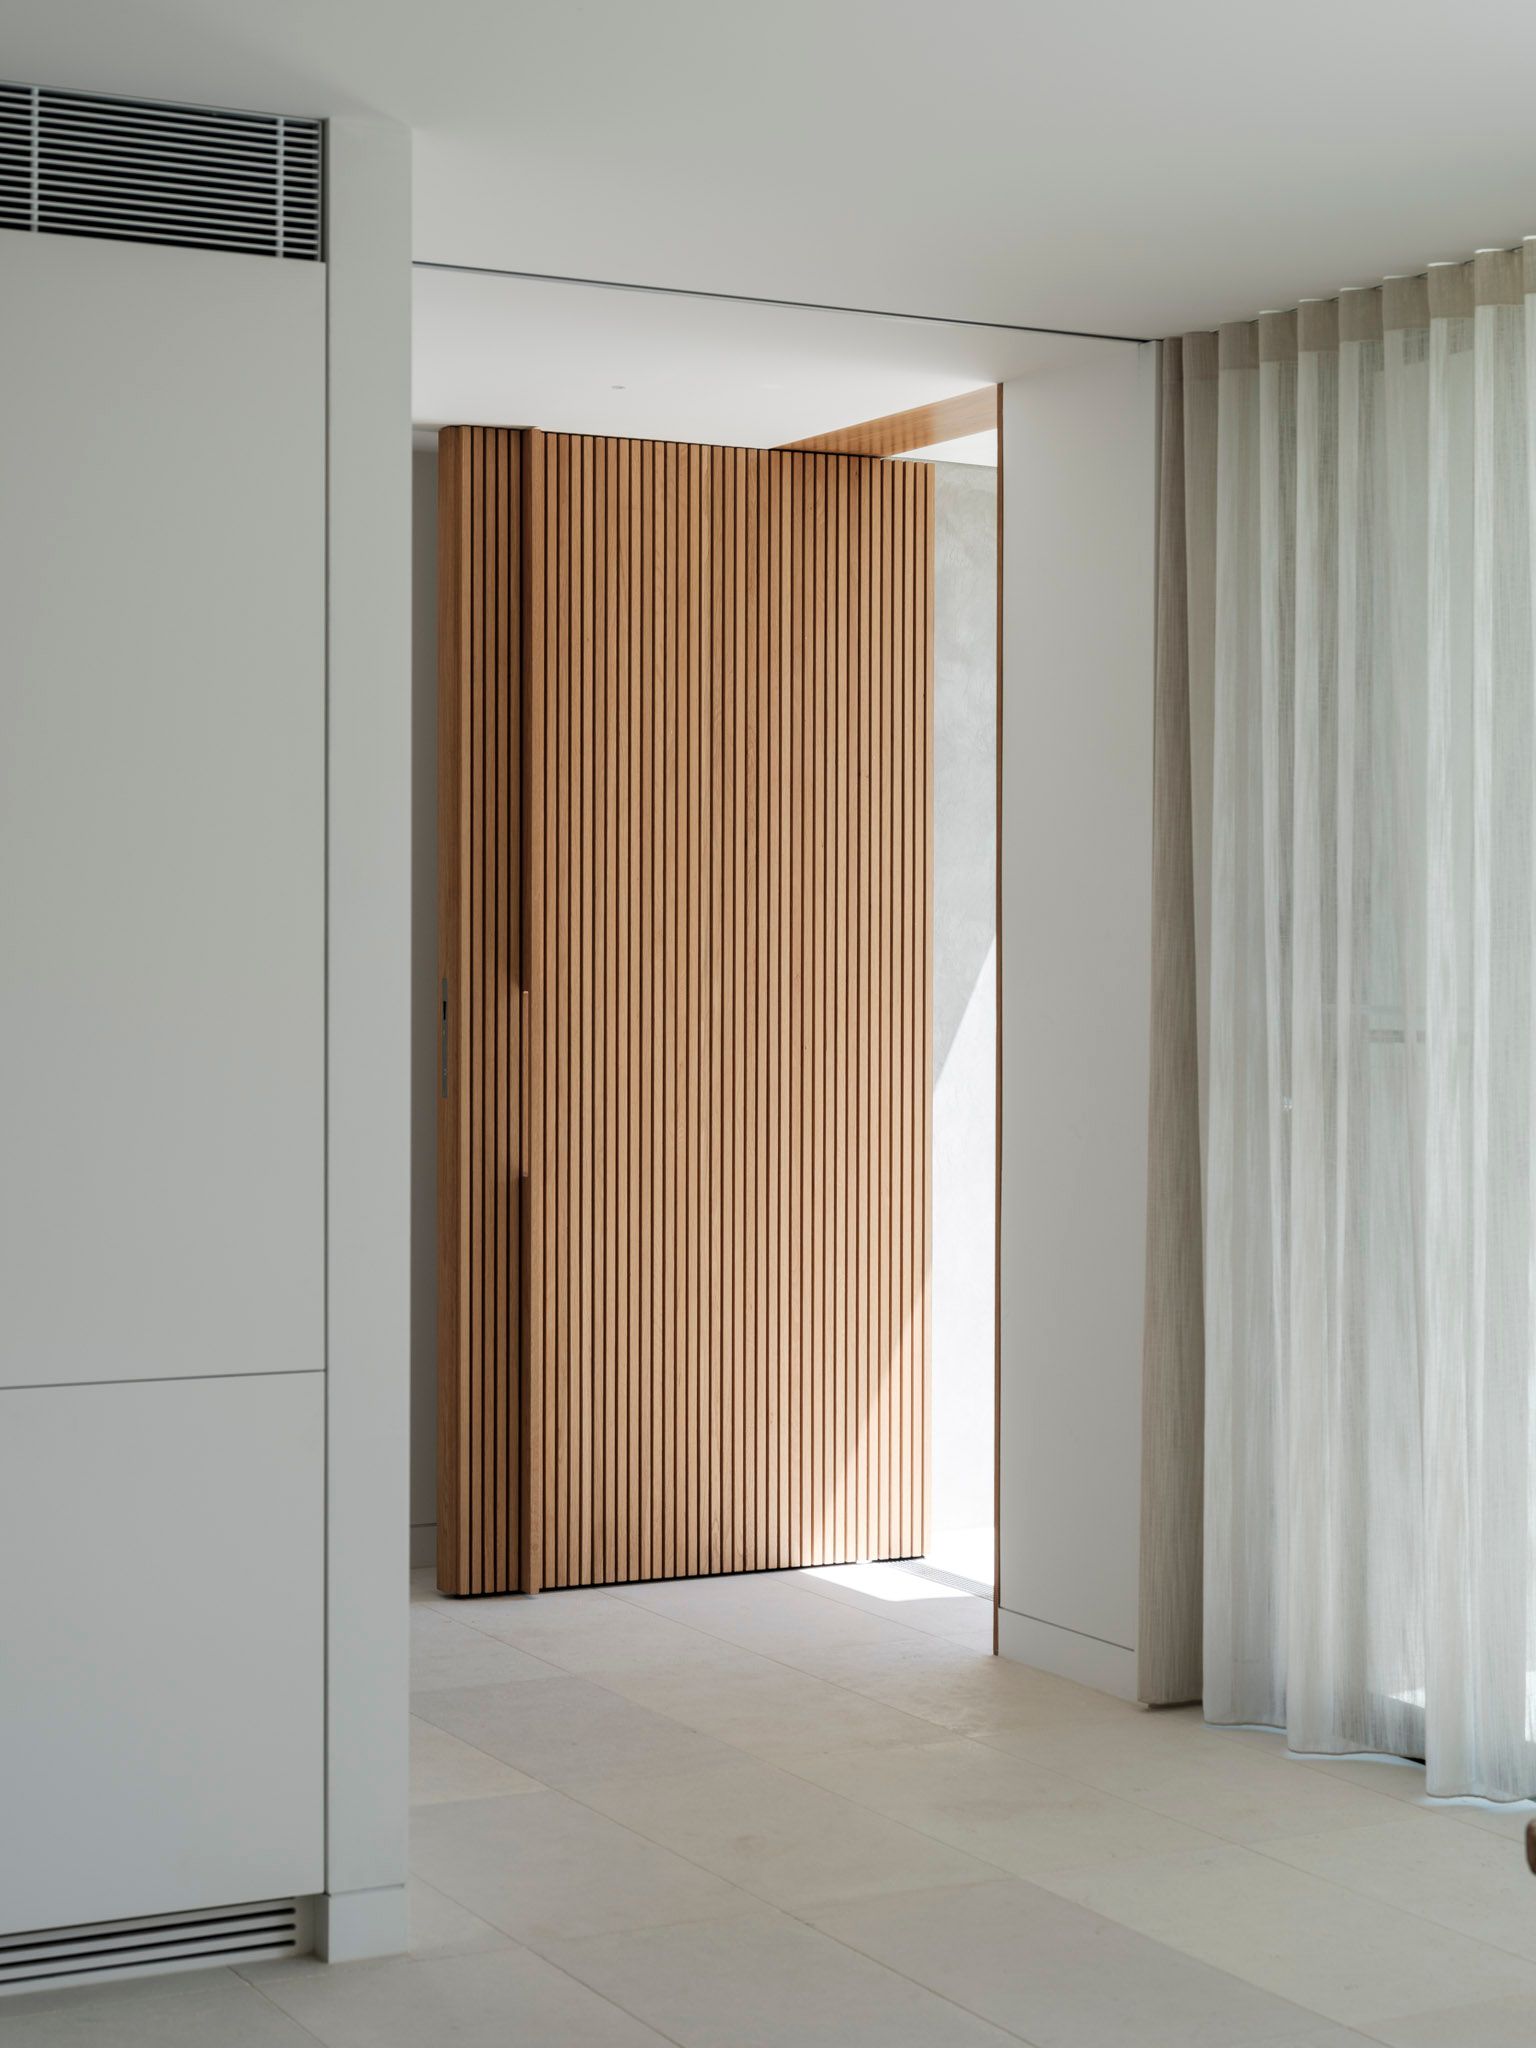 Northbridge by Corben Architects showing timber clad front door